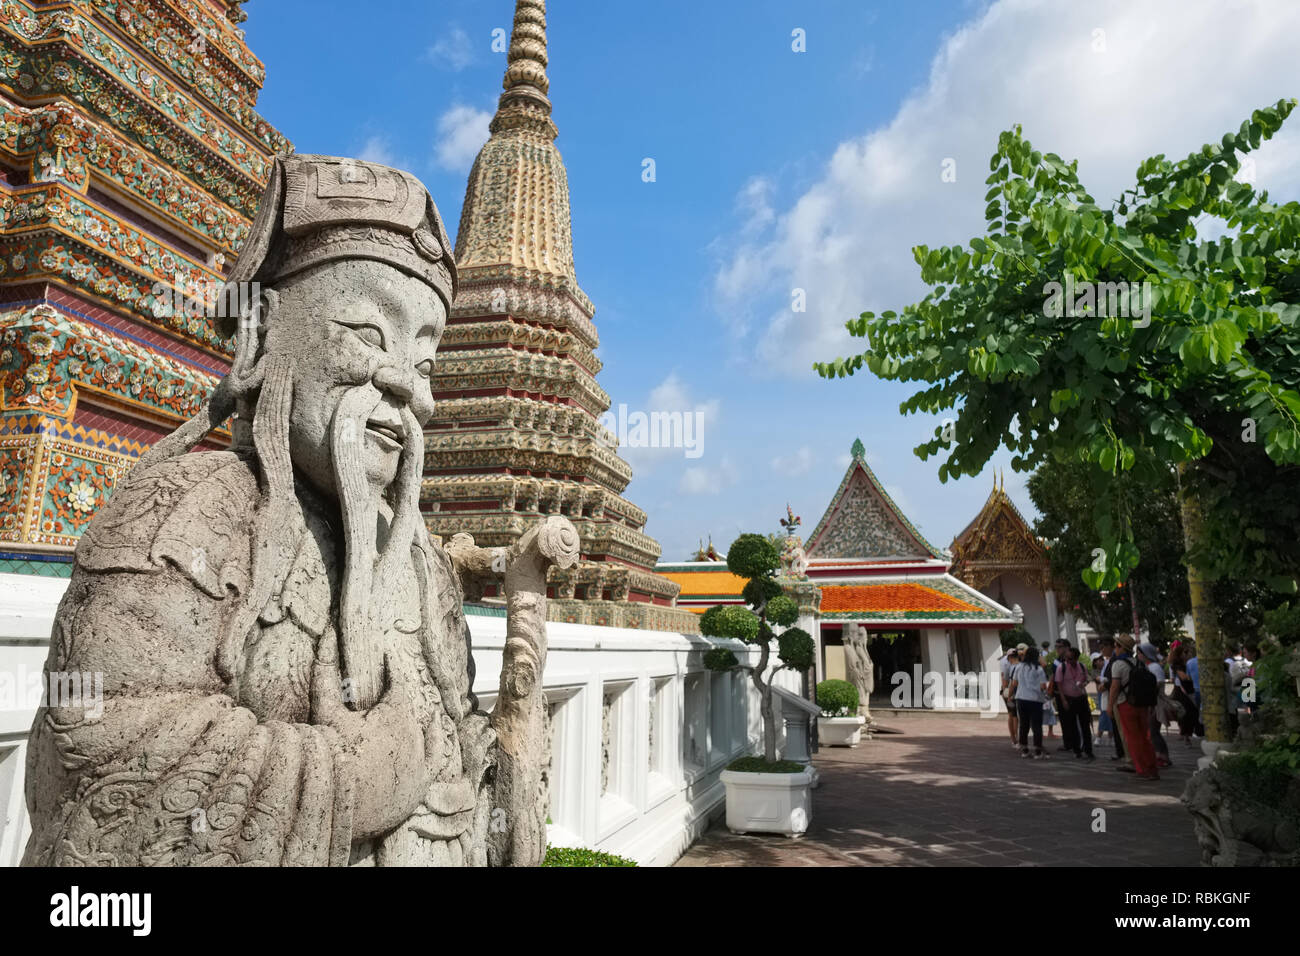 A Chinese figure in the grounds of Wat Po (Pho) Bangkok, Thailand, the site of the famous Reclining Buddha Stock Photo